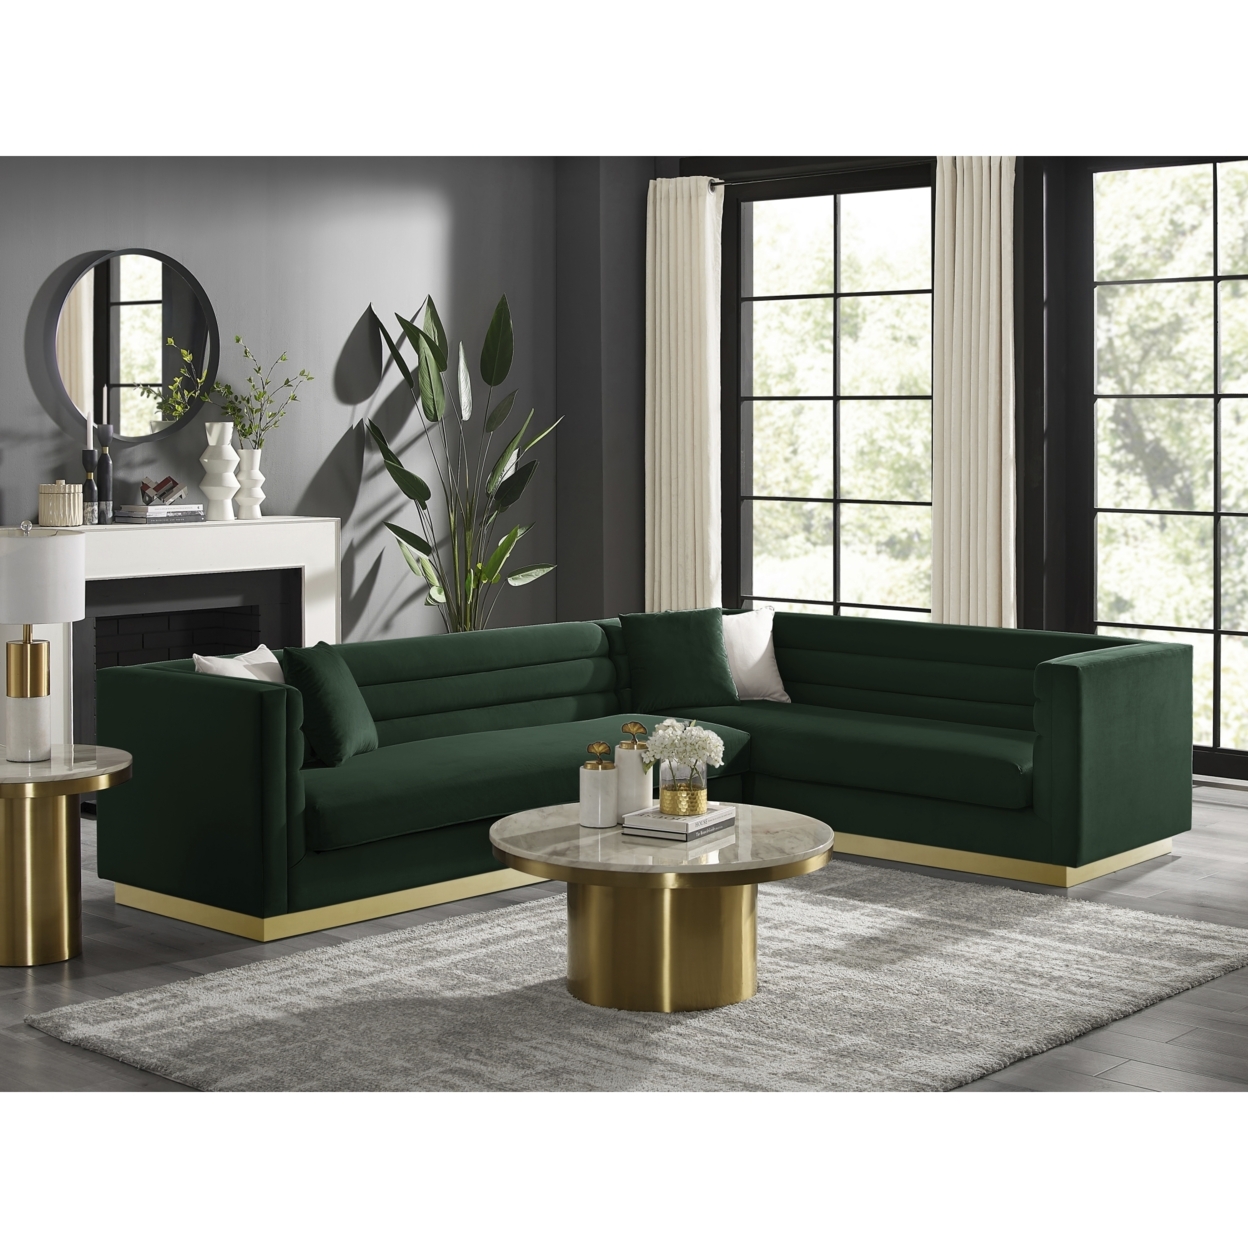 Aja Sofa-Upholstered-Metal Base, Sectional-Square Arms-Horizontal Channel Tufting - Navy